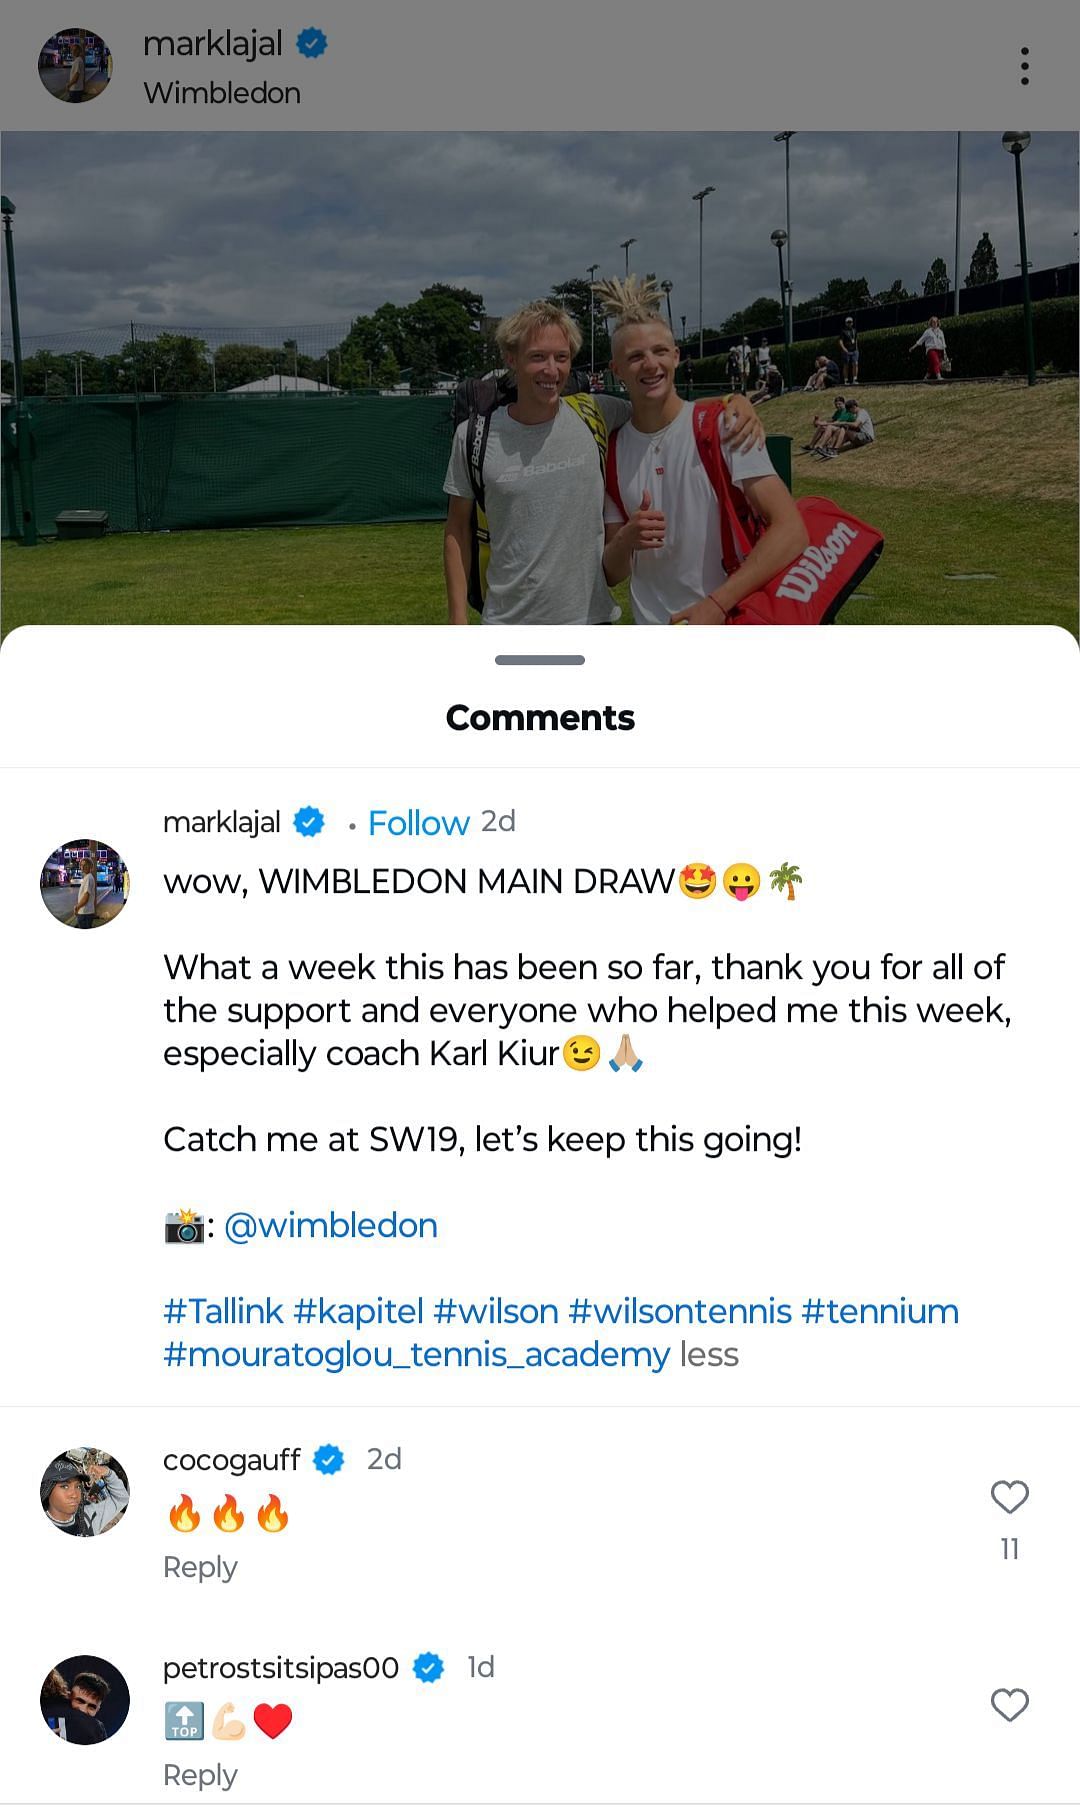 Coco Gauff and Stefanos Tsitsipas&#039; brother Petros on Instagram